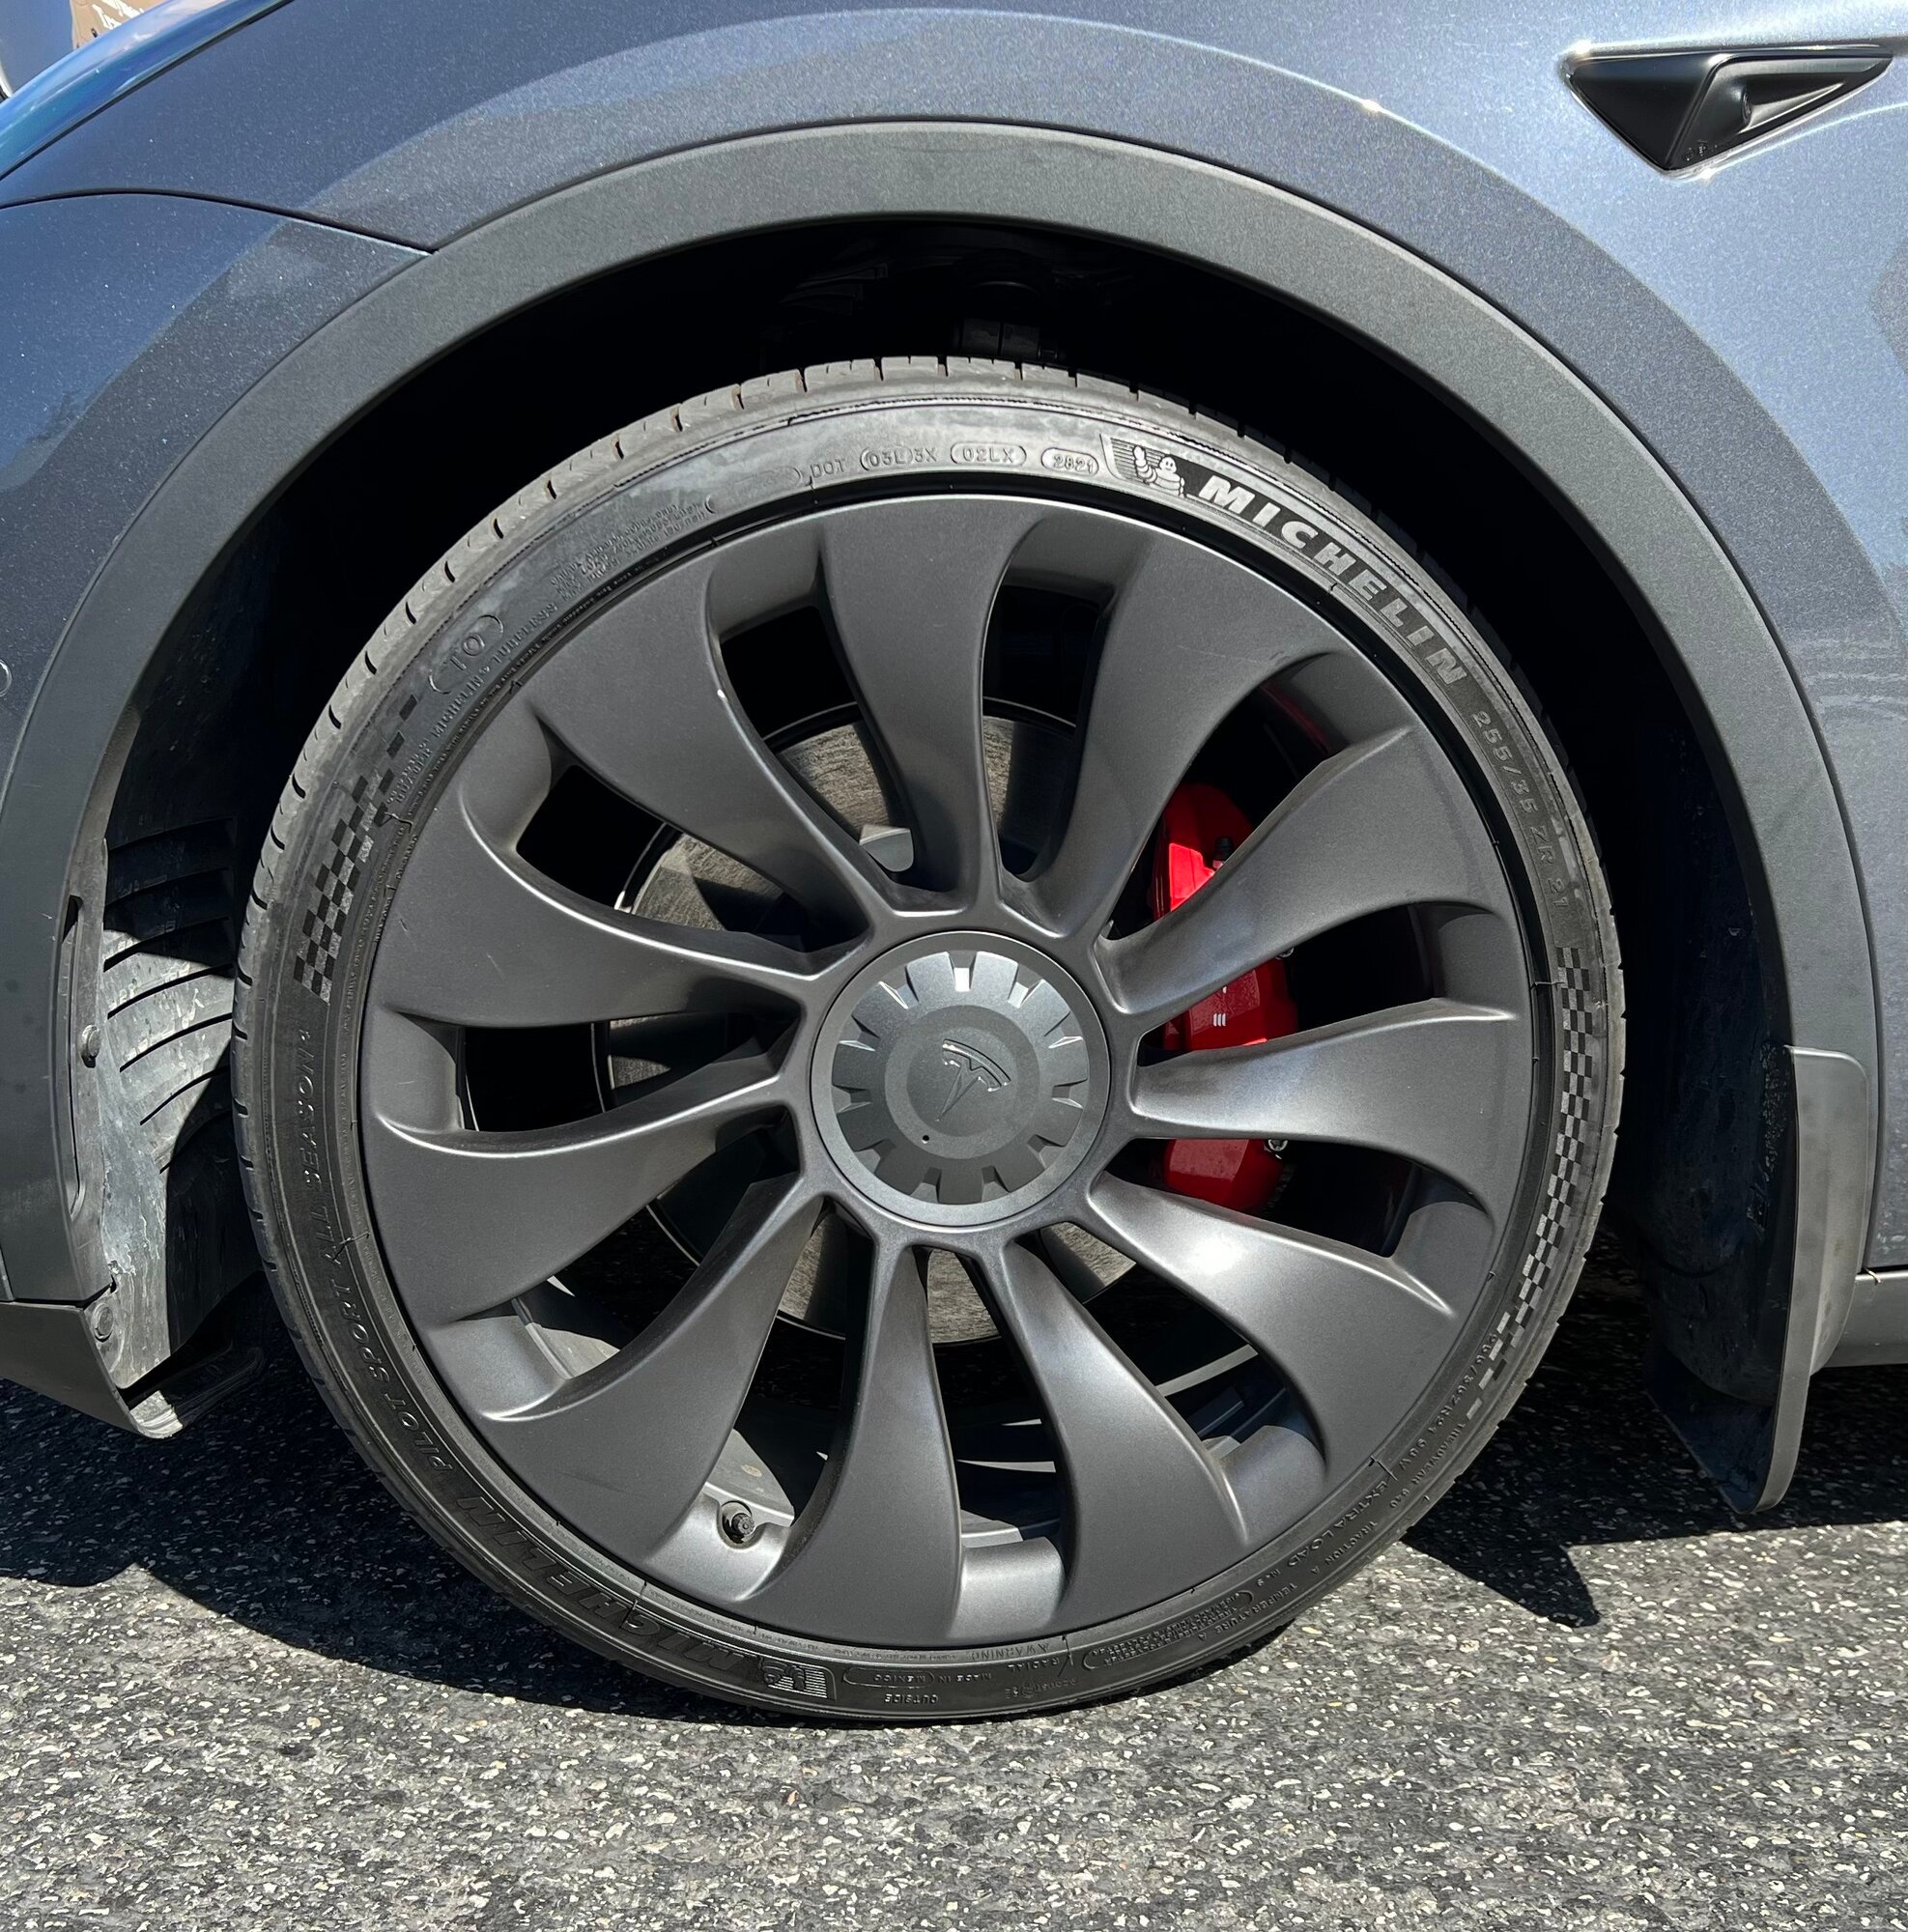 Model Y Performance 21" Tires - Larger, More Comfortable Fitment Details  and Experience - Michelin AS4's (With Photos) | Tesla Motors Club